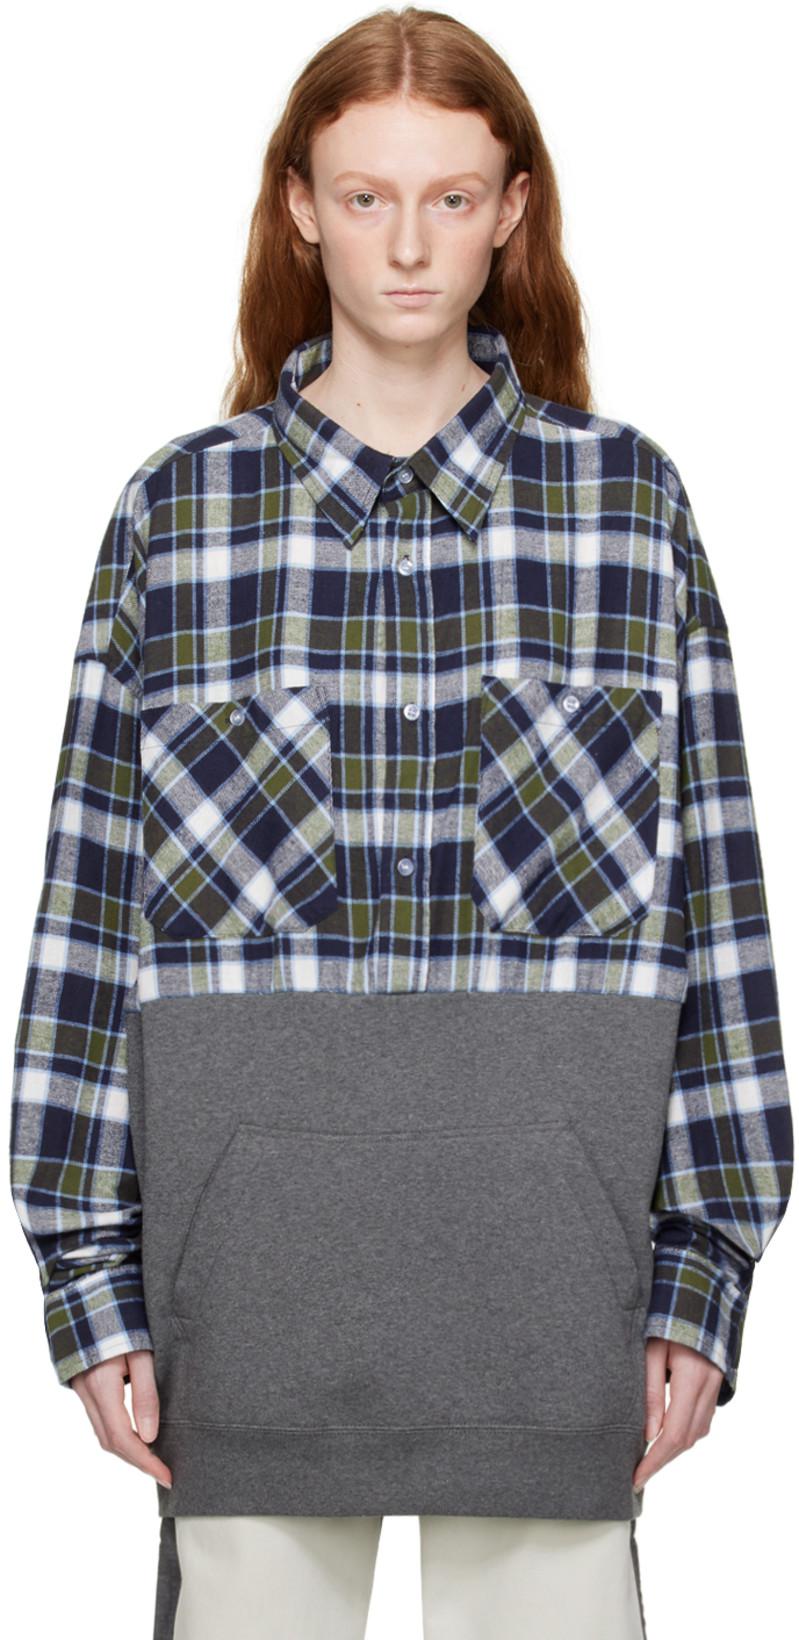 SSENSE Exclusive Gray Shirt by BLESS